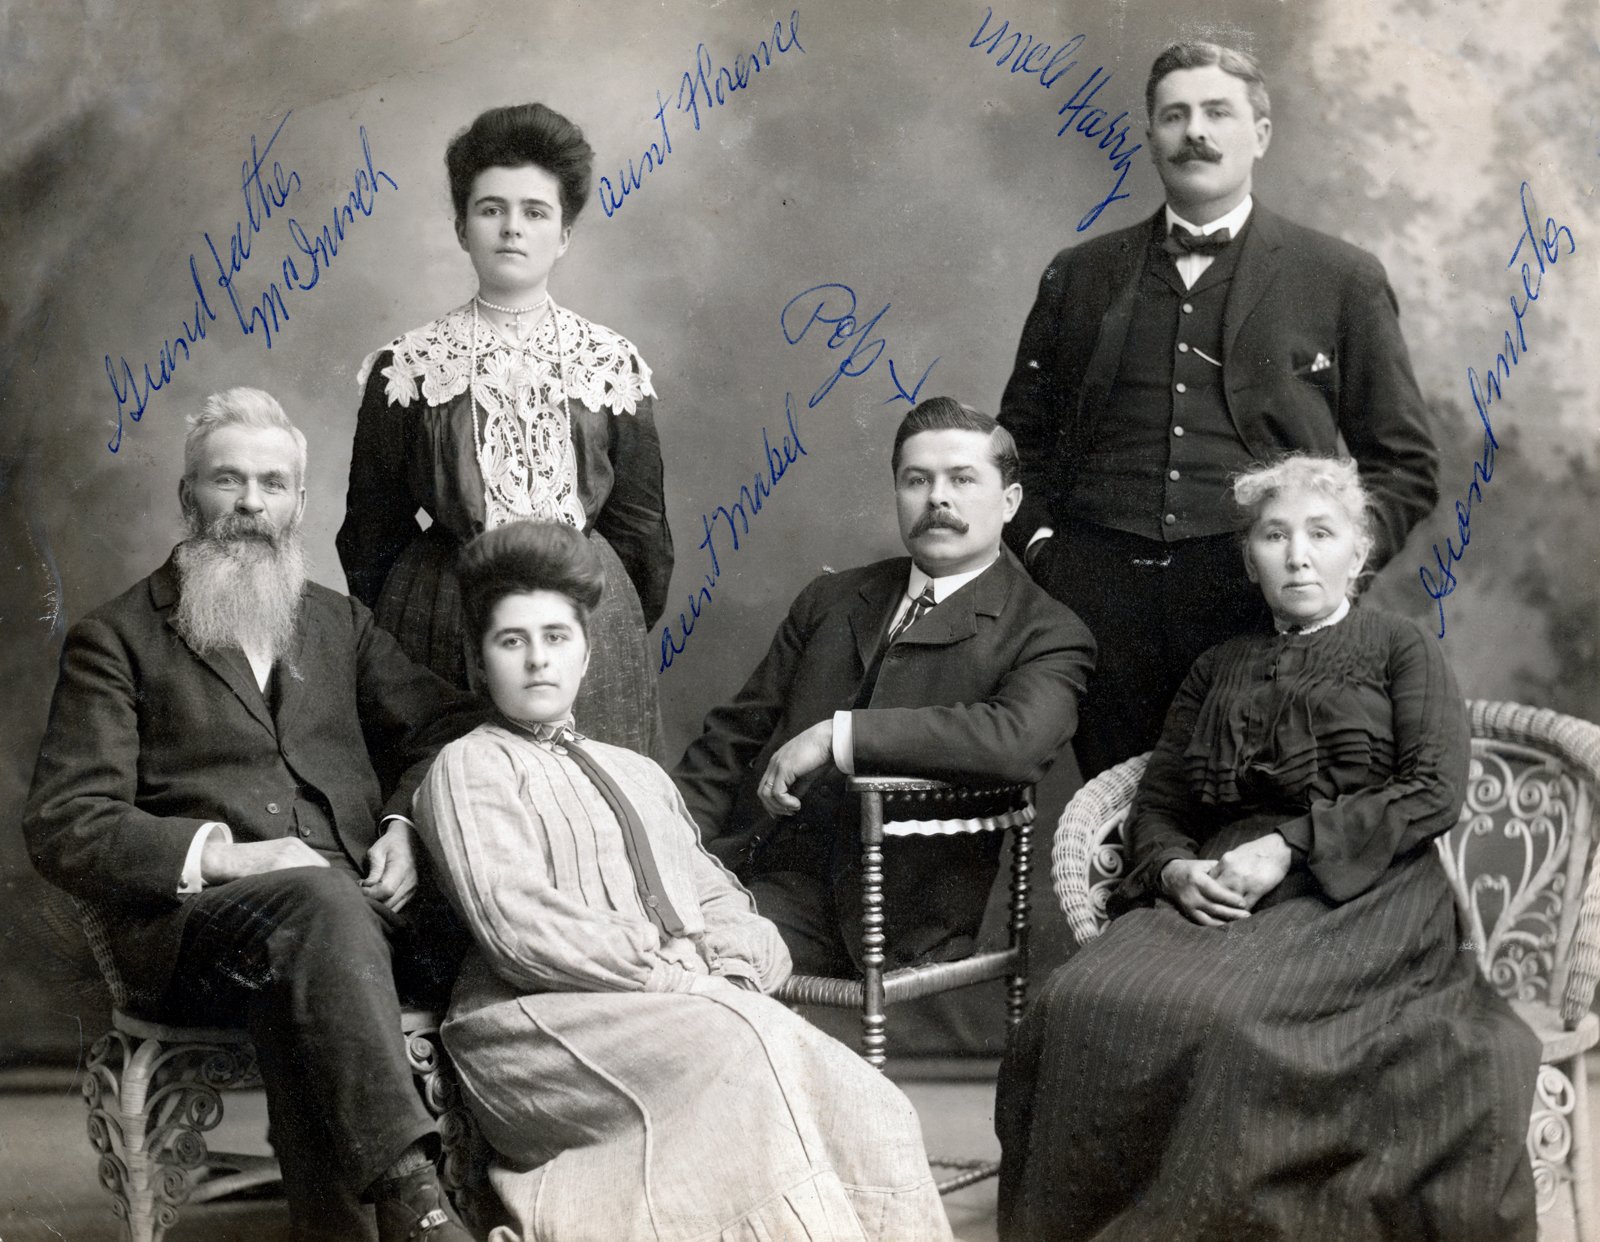 A portrait of the McIninch family taken in Belleville, Ontario, late 1890s or early 1900s.